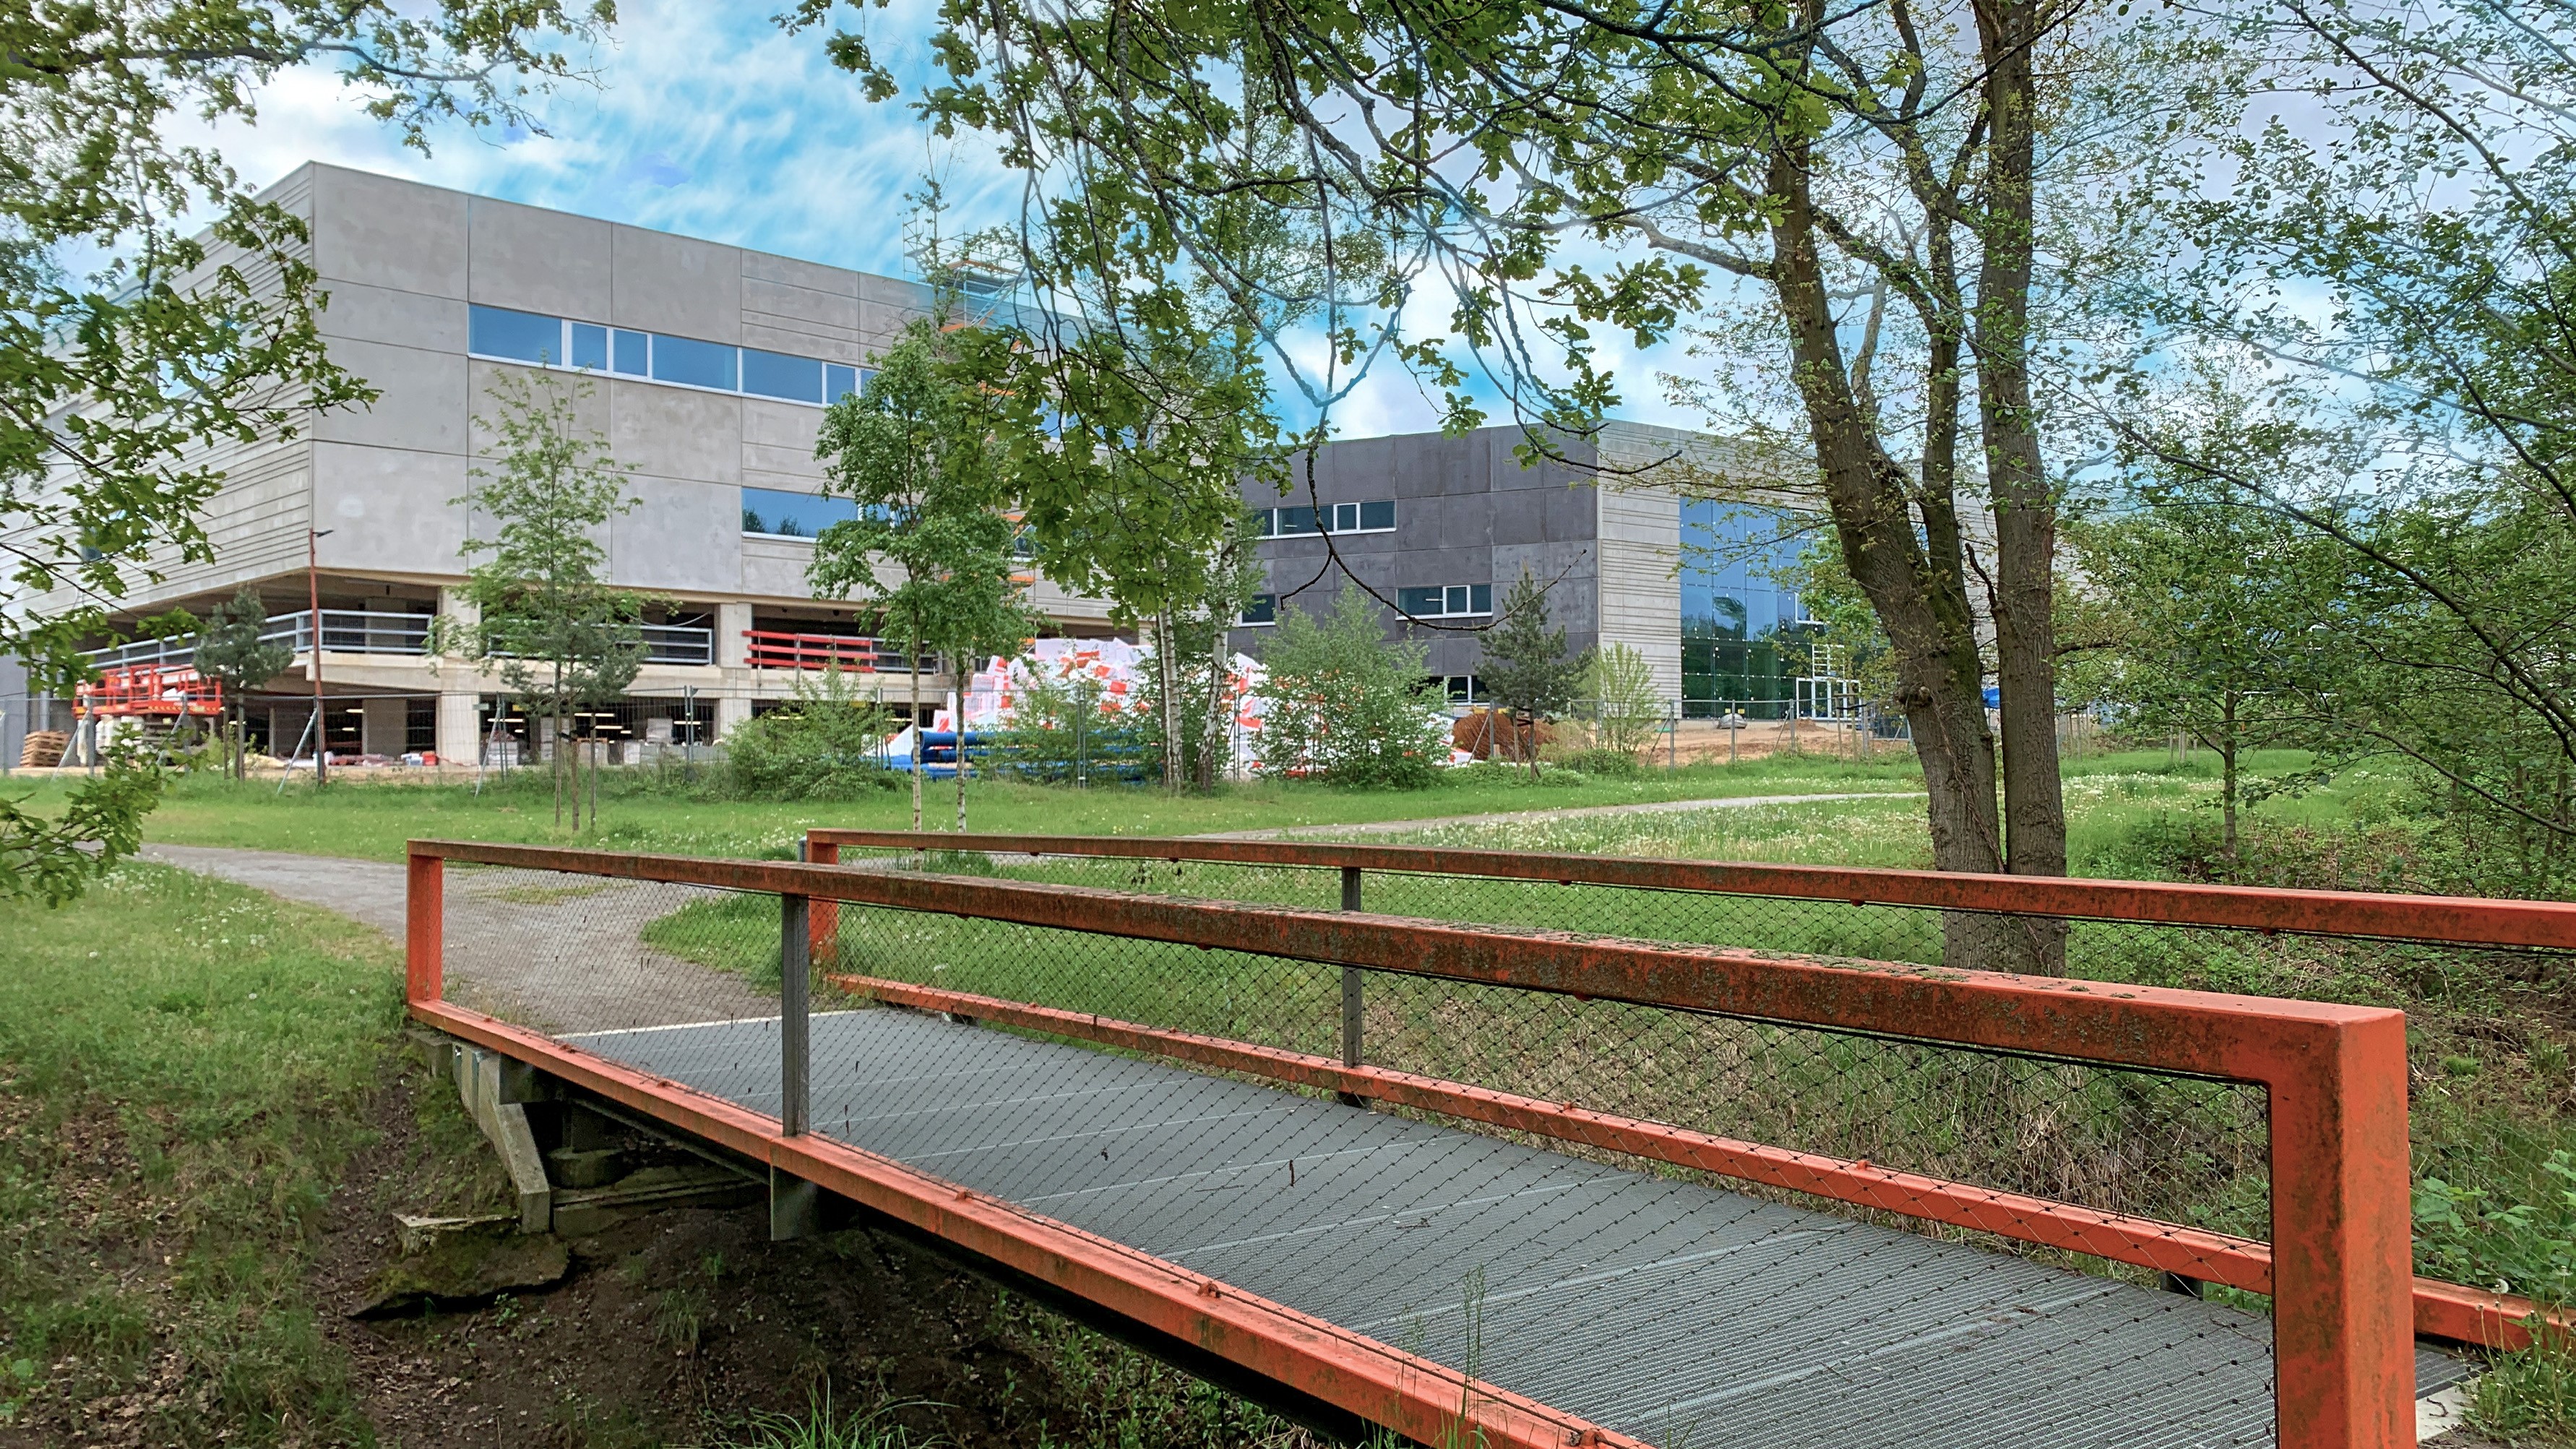 Faurecia headquarters: North view from the park